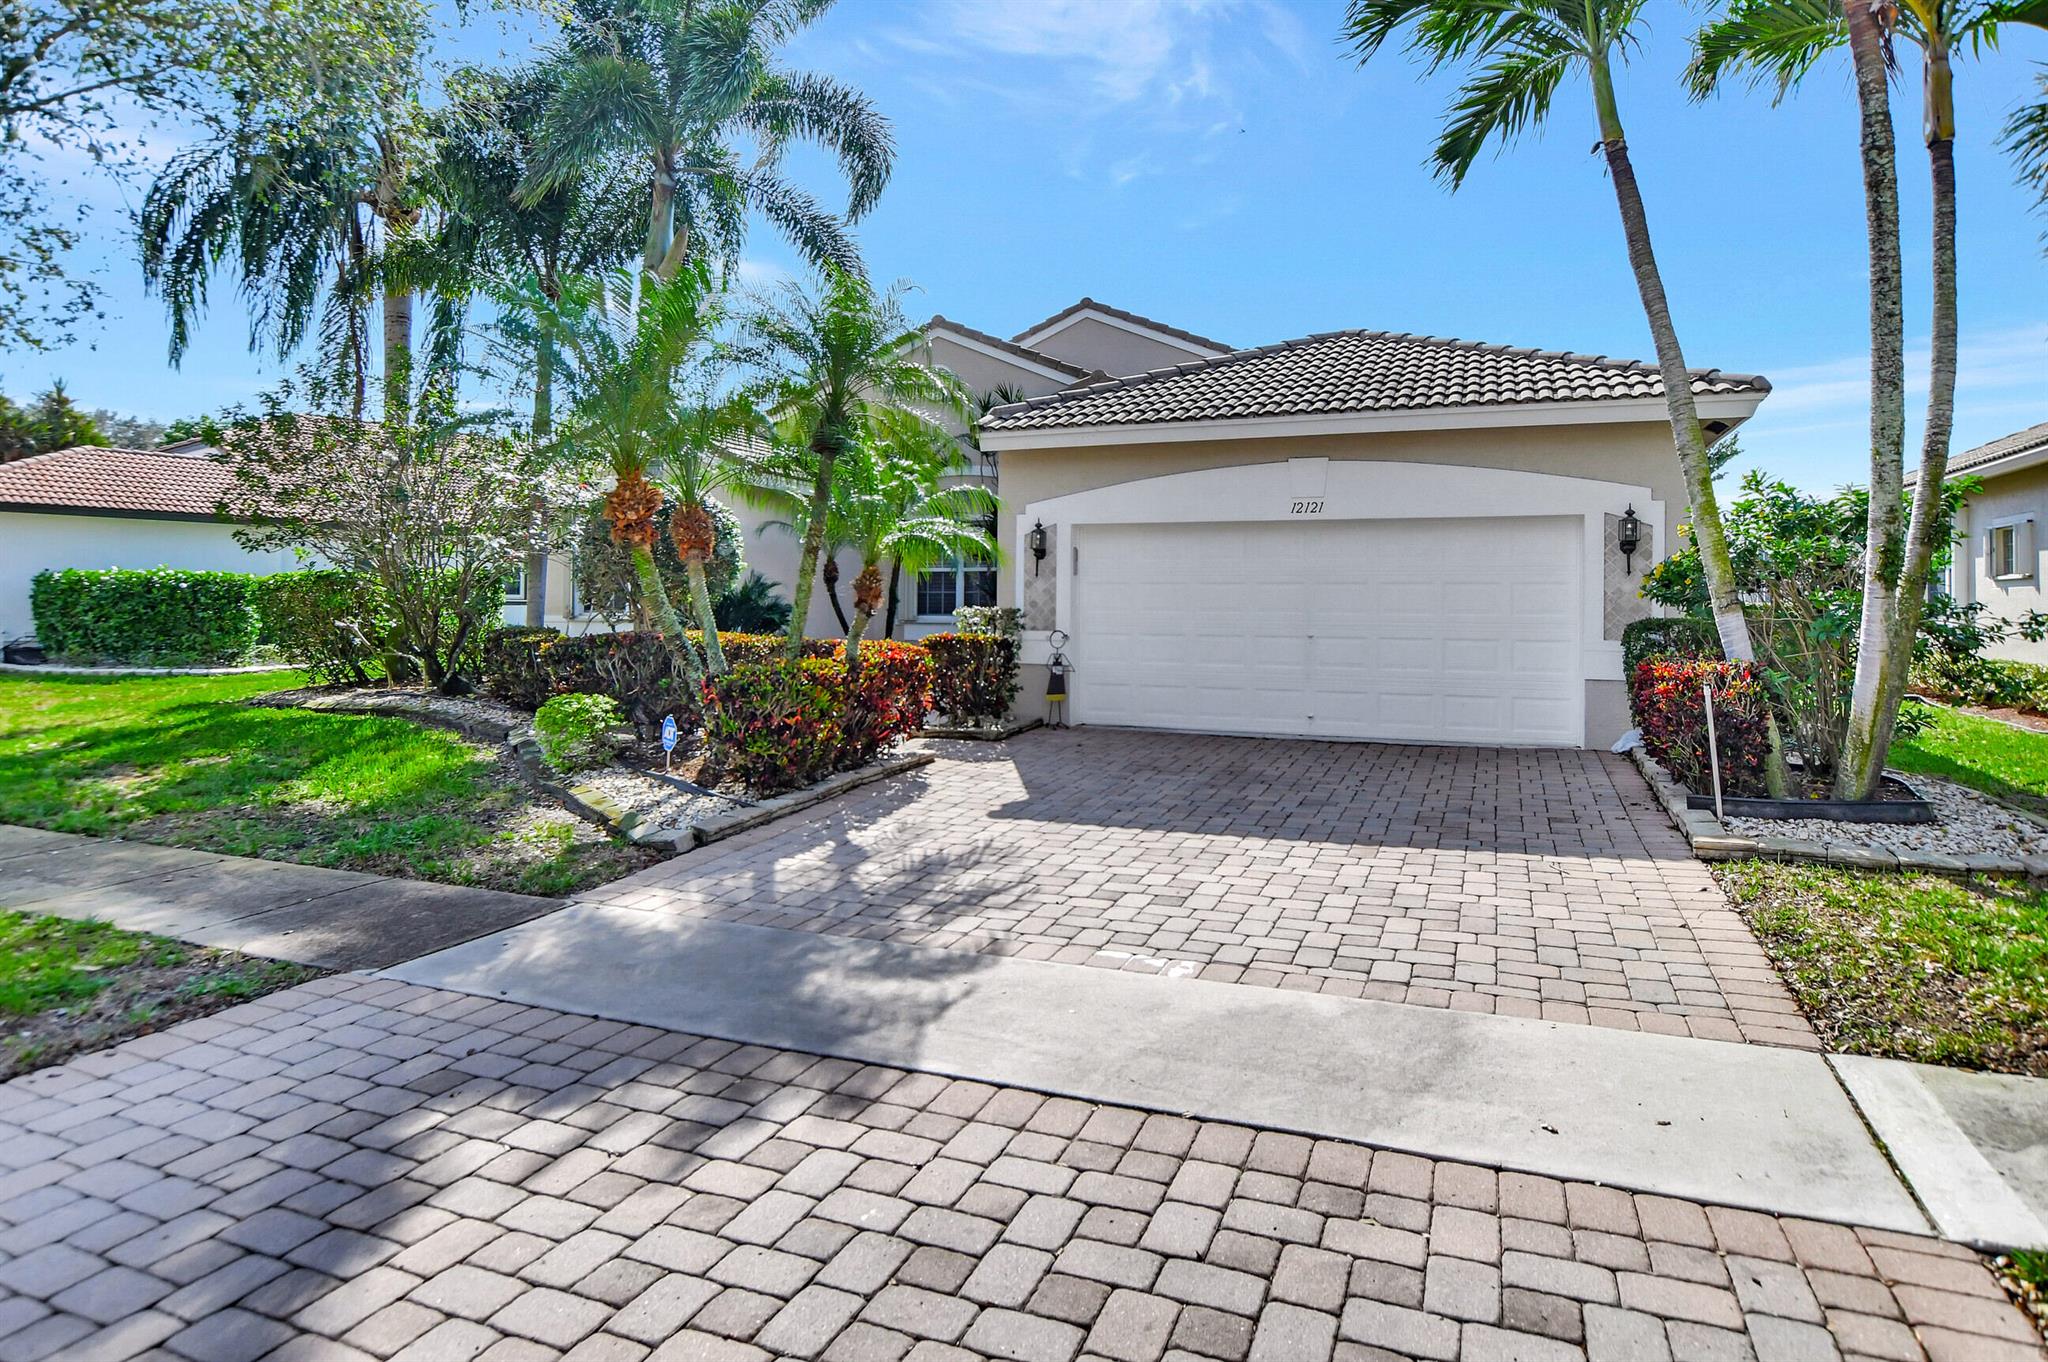 BEAUTIFUL LAKE FRONT SCREEN ENCLOSED HEATED POOL HOME IS THE HIGHLY DESIRED EXCALIBAR MODEL BOASTING 3 TRUE BEDROOMS W/CLOSET & DOORS IN ALL, 3BR/2.5BA + FAMILY ROOM, 2-CAR GARAGE. ESTATE HOME BOASTS 2410 SQ.FT U/A. THIS IS NOT A ZERO LOT LINE. THERE ARE WINDOWS ON BOTH SIDES OF HOME MAKING IT LIGHT & BRIGHT. PROFESSIONAL LANDSCAPE SURROUNDS HOME. FULLY EQUPPED W/ACCORDION HURRICANE SHUTTERS, WHIRLPOOL SPA IN PRIMARY BATHROOM, WIRED SURROUND SOUND IN FAMILY ROOM & OUTDOOR PATIO. KITCHEN IS A CHEF'S DELIGHT W/UPDATED STAINLESS-STEEL REFRIGERATOR & DISHWASHER. 42 INCH CABINETS W/LARGE PANTRY, GRANITE COUNTERS, OVERSIZED SINK & MORE. GLASS BLOCK WNDOWS ADD TO THE NATURAL LIGHT IN THE KITCHEN. DON'T MISS THIS ONE. WON'T LAST LONG HOME OFFERS THE OPEN CONCEPT WITH A LARGE FAMILY ROOM OVERLOOKING THE BREAKFAST AREA &amp; KITCHEN. PLUS, THERE IS A FORMAL LIVING ROOM &amp; FORMAL DINING ROOM. THE KITCHEN HAS GRANITE COUNTERS, UNDERMOUNT SINK, 42'' WOOD CABINETS, AND A HUGE PANTRY. PRIMARY BEDROOM HAS BAY WINDOWS LOOKING OVER THE LAKE AND TWO LARGE WALK-IN CLOSETS AND BATH BOASTS A JACUZZI TUB PLUS AN 80 GAL HW HEATER. HOME HAS UPGRADES GALORE INCLUDING HUNTER DOUGLAS SILOWETTE BLINDS, HIGH-HATS GALORE, MIRROR TO CEILING, UPGRADED SECURITY SYSTEM WITH MOTION DETECTORS &amp; WINDOW BREAKAGE FEATURE. LARGE LAUNDRY ROOM EQUIPPED W/SAMSUNG WASHING MACHINE &amp; UPDATED DRYER. AC COMPLETE UNIT REPLACED 6/28/19. KEYLESS ENTRY ON FRONT DOOR &amp; GARAGE DOOR. NEUTRAL TILE ON DIAGONAL, CROWN MOLDINGS, KNOCKDOWN FINISHES, TRAY CEILINGS &amp; THE WORKS. THE SECOND &amp; THIRD BEDROOMS CONNECT TO A JACK+ JILL FULL BATHROOM. THE HEATED POOL OFFERS A PAVERED DECK AND IS FULLY ENCLOSED IN A UPDATED CODE APPROVED SCREEN. CUSTOM LANDSCAPING. FULL ACCORDIAN HURRICANE SHUTTERS. LIVING IN AVALON ESTATES IS LIKE LIVING AT A VERY ATTRACTIVE RESORT. COME ENJOY THE 25,000SQ FT CLUBHOUSE WITH A HUGE POOL, FITNESS CENTER, CARD ROOMS, ARTS+ CRAFTS AND A THEATER FOR A LIVE SHOWS. PLUS YOU CAN ENJOY SIX LIGHTED TENNIS COURTS, BOCCE AND MORE. SELLER IS INCLUDING THE WINE COOLER. FURNISHINGS CAN BE PURCHASED.  COME LIVE THE COUNTRY CLUB LIFESTYLE WITHOUT PAYING COUNTRY CLUB FEES. Outstanding Redecorated Clubhouse with an Olympic Sized Swimming Pool, Spa, Fitness Center, Pickleball &amp; Tennis Courts, Card Rooms, Art Studio, Bocce Ball, Billiards &amp; So much more. Something for everyone if you so desire!  This Community offers Shows, Events, and magnificent Concerts Throughout the Year! Great location which is close to Highways, Suburb Shopping &amp; Outstanding Restaurants. Resort Style Living at Its Finest.